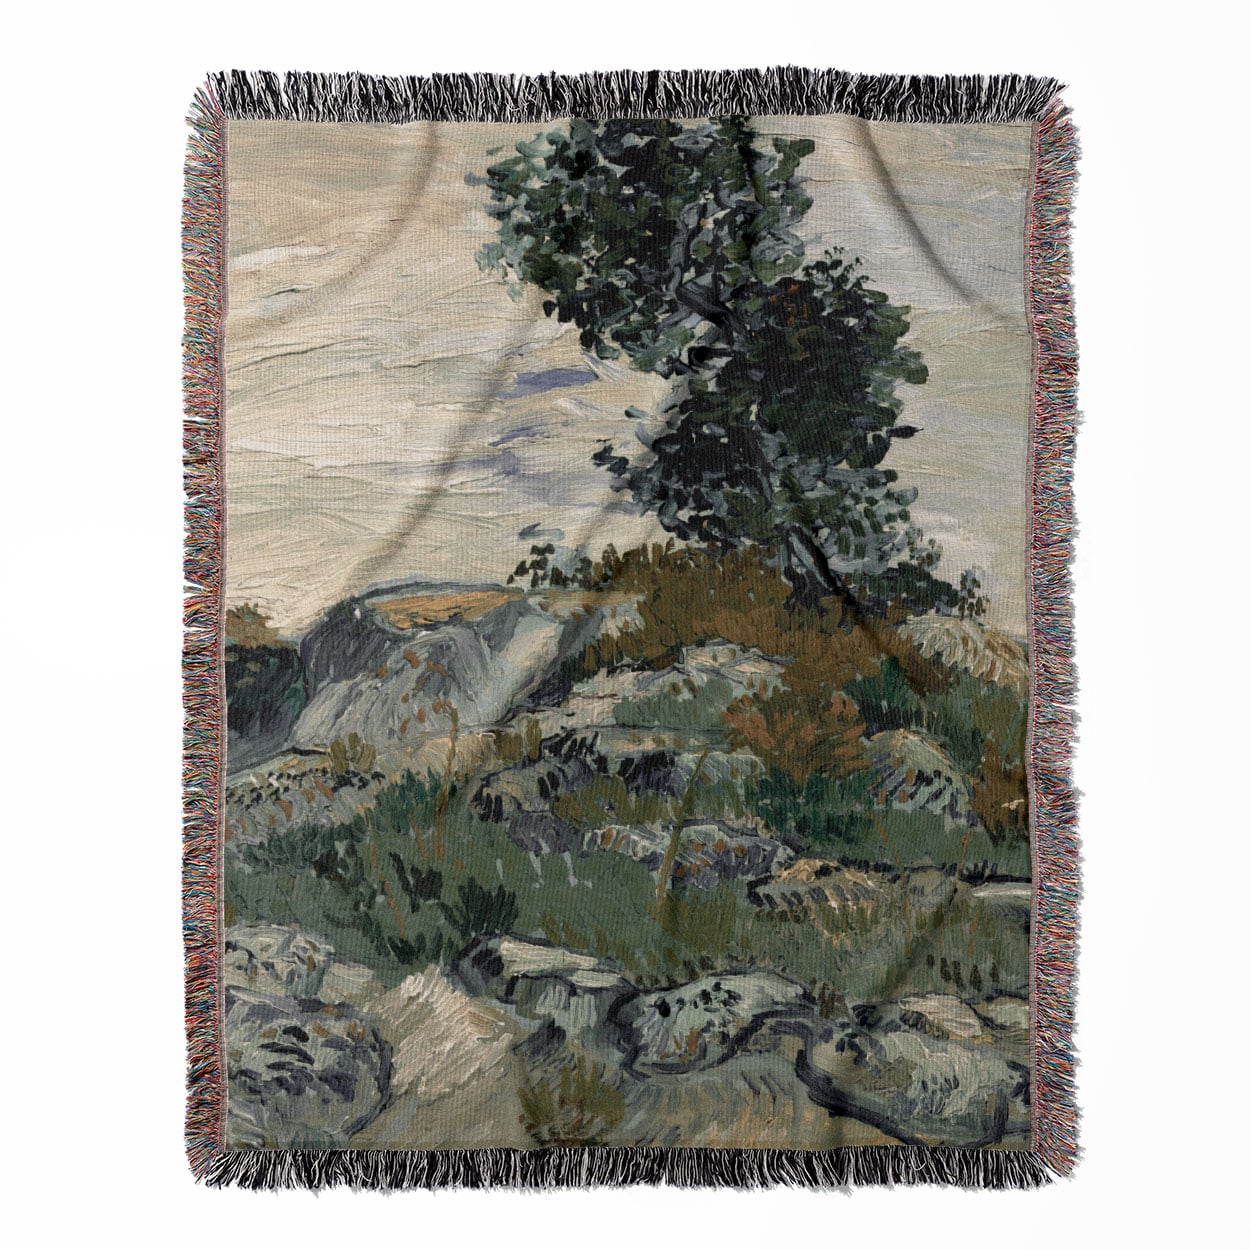 Green Aesthetic Landscape woven throw blanket, made of 100% cotton, featuring a soft and cozy texture with a nature theme for home decor.